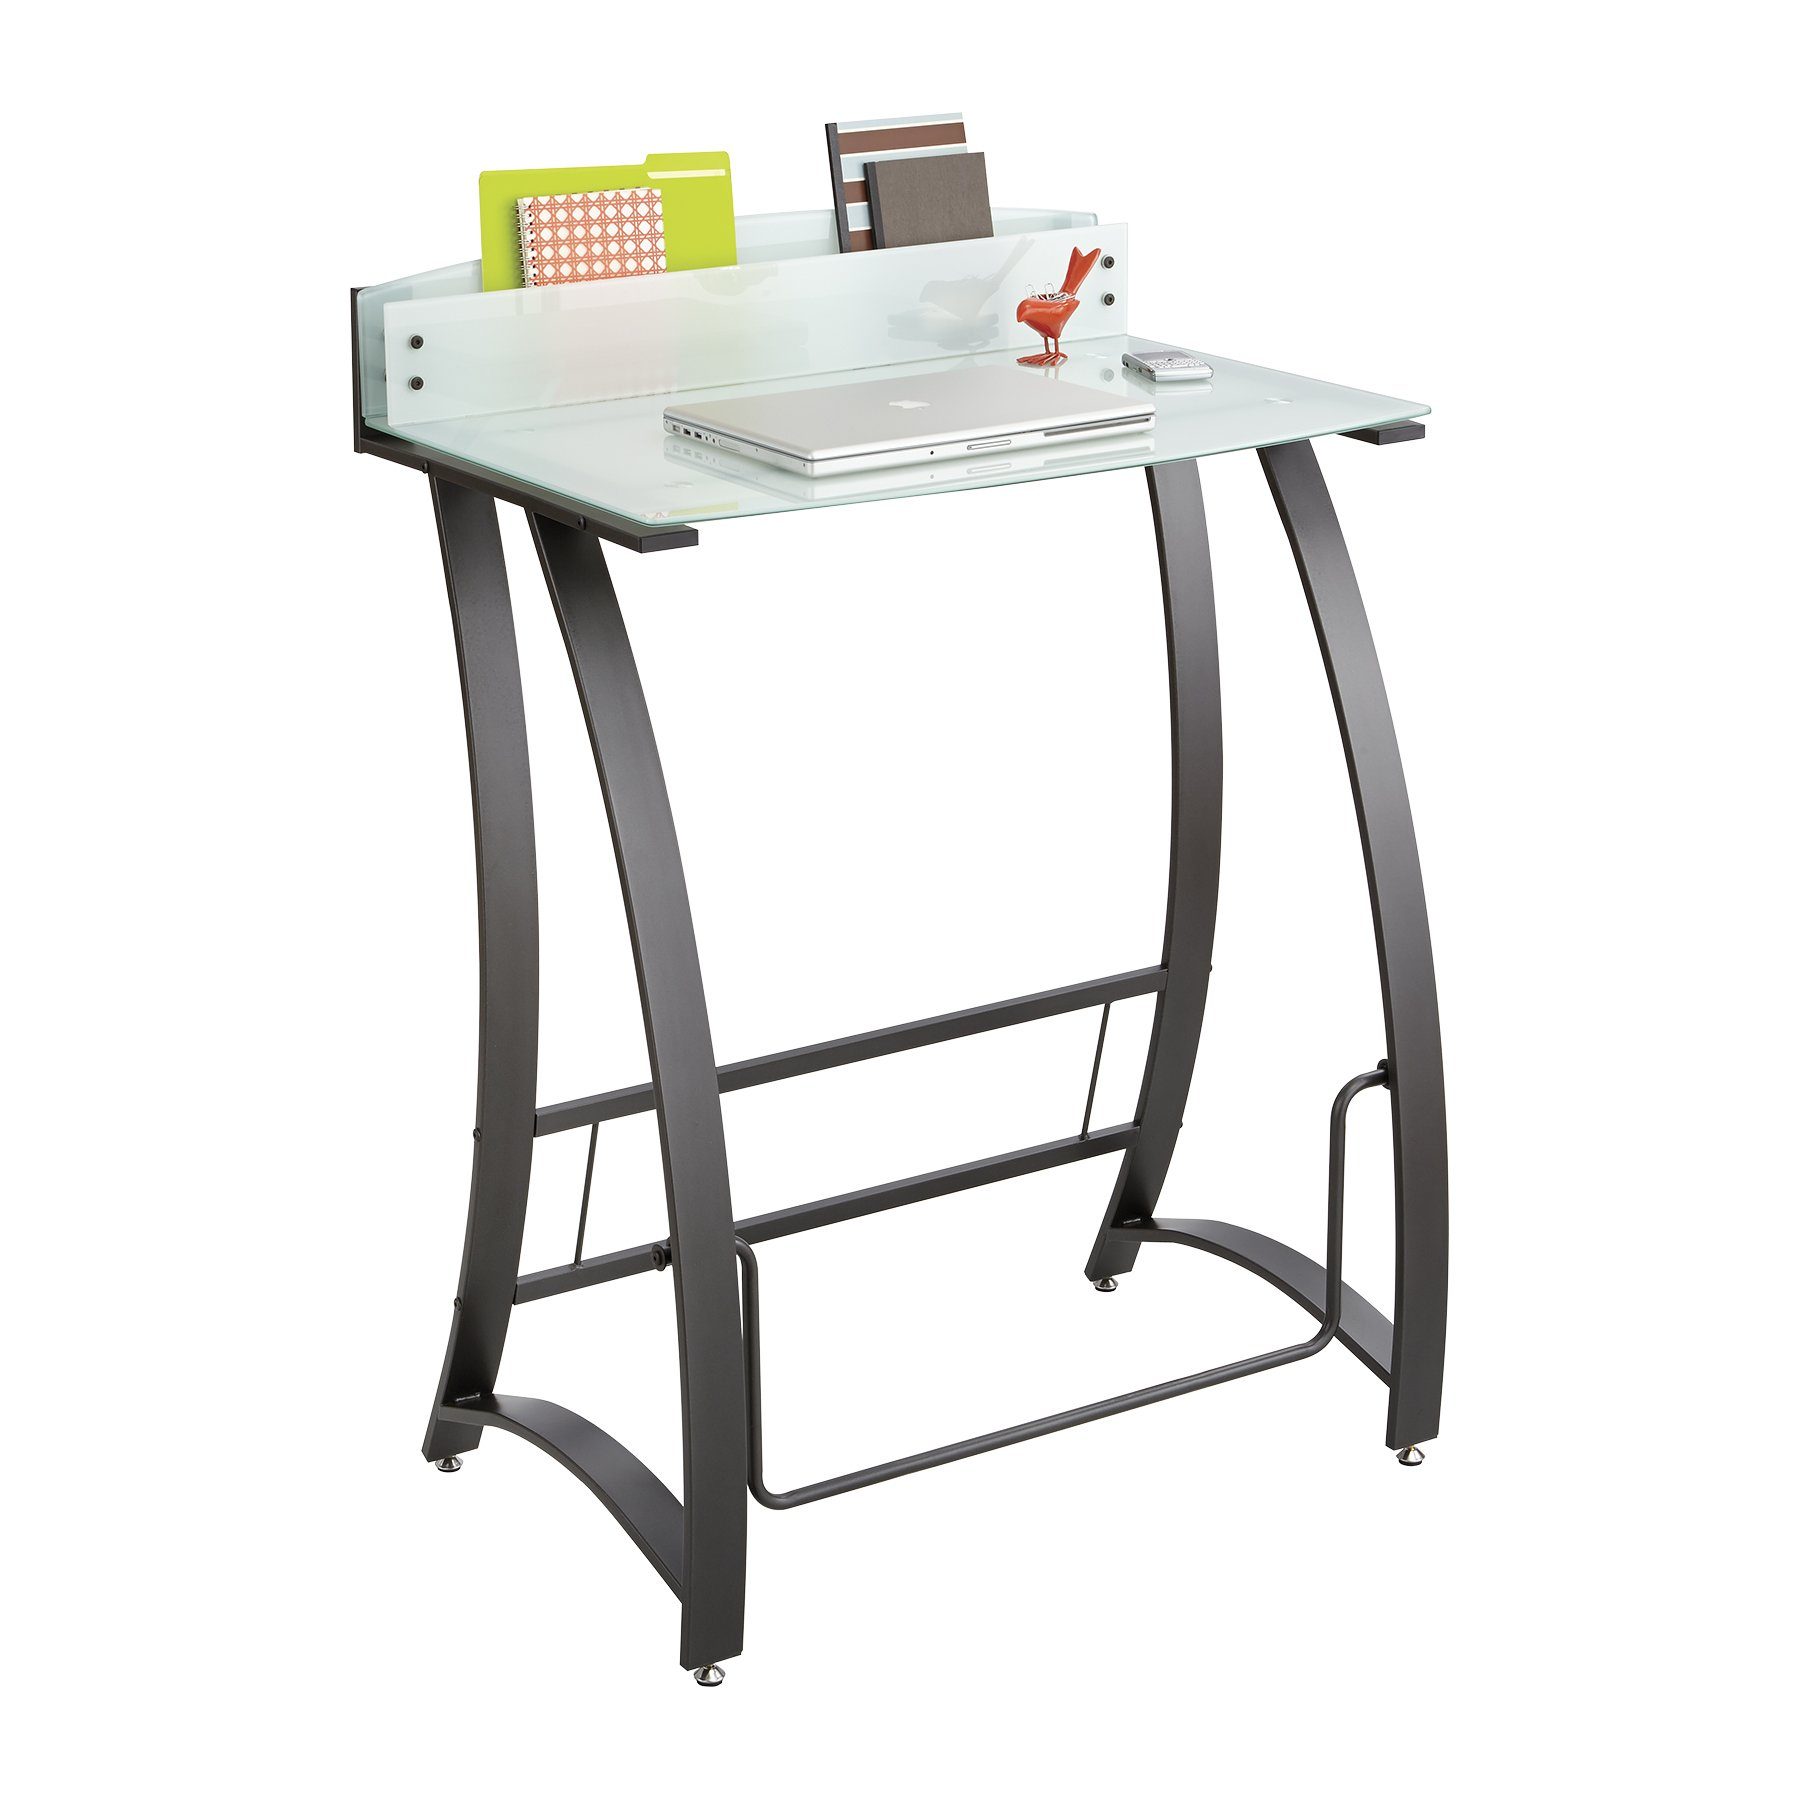 Xpressions Stand Up Desk By Safco From Fitneff Canada